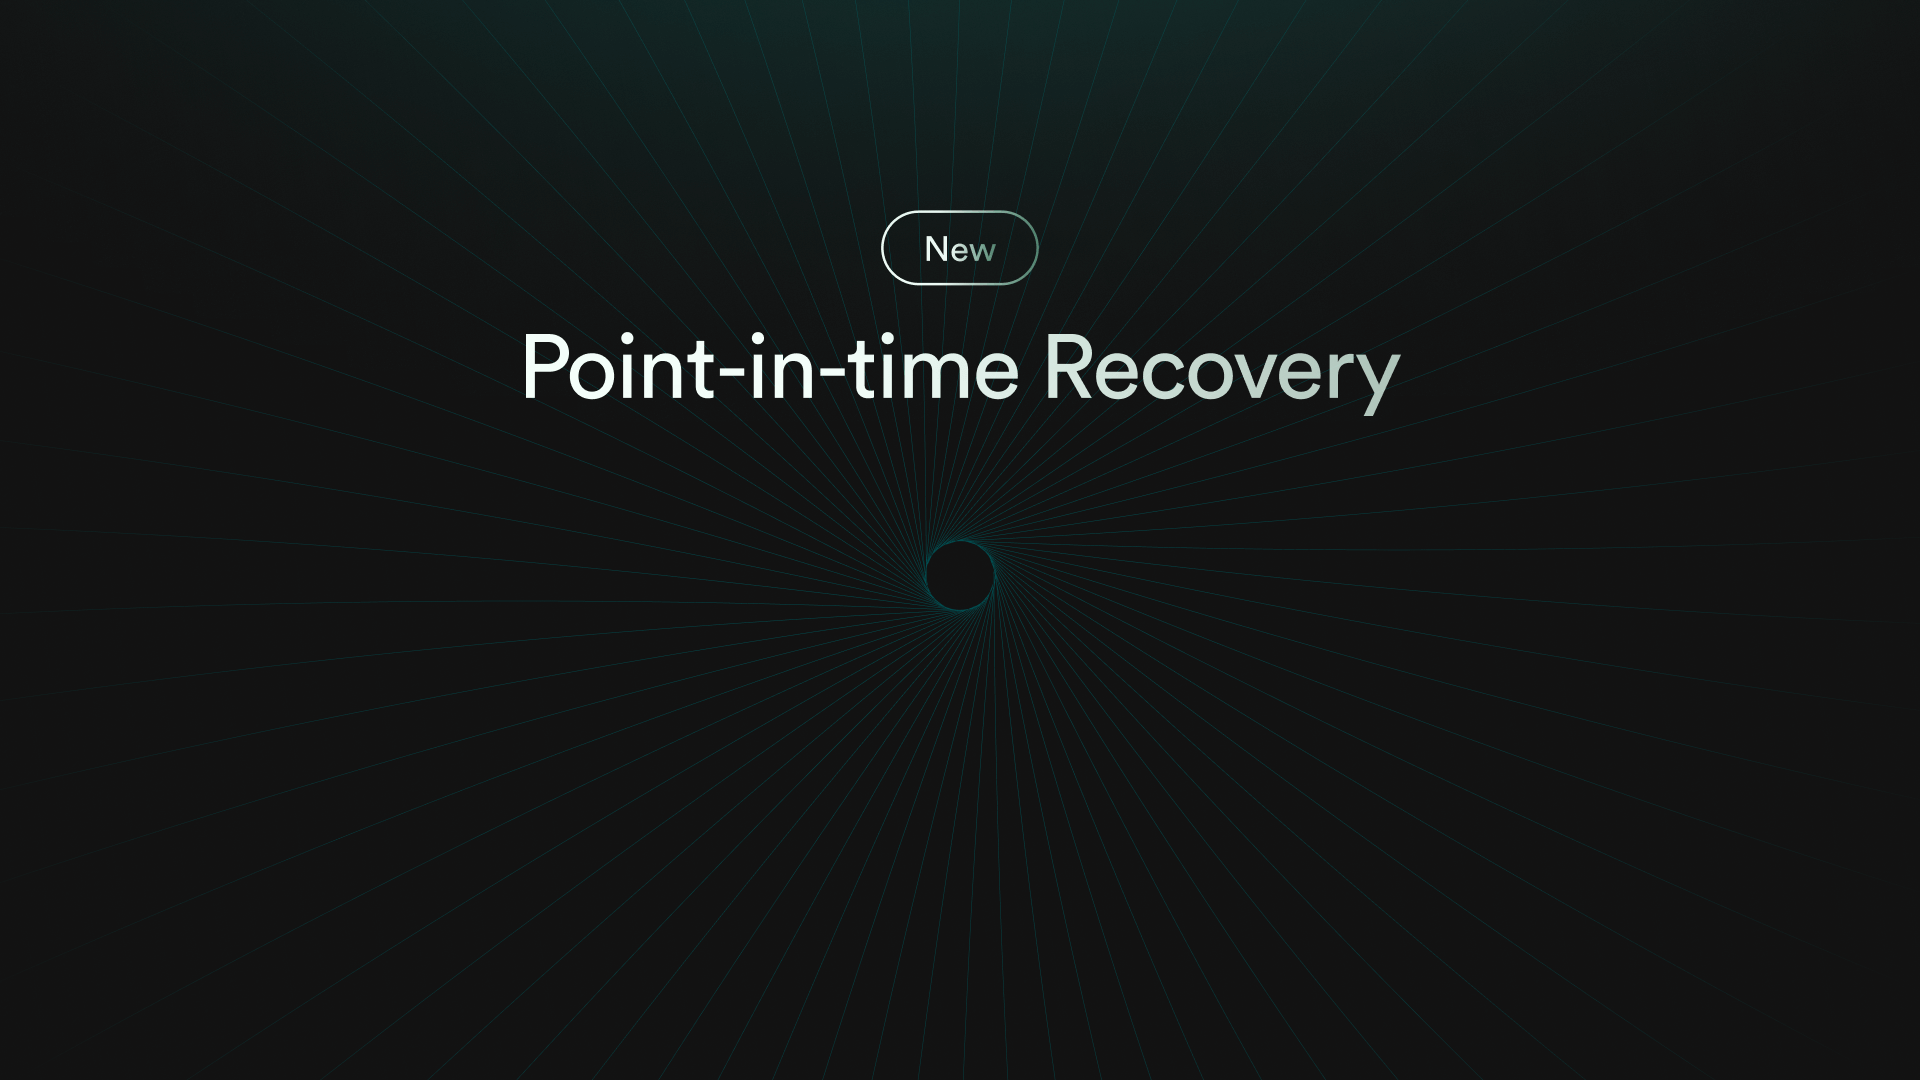 Point in Time Recovery is now available for Pro projects